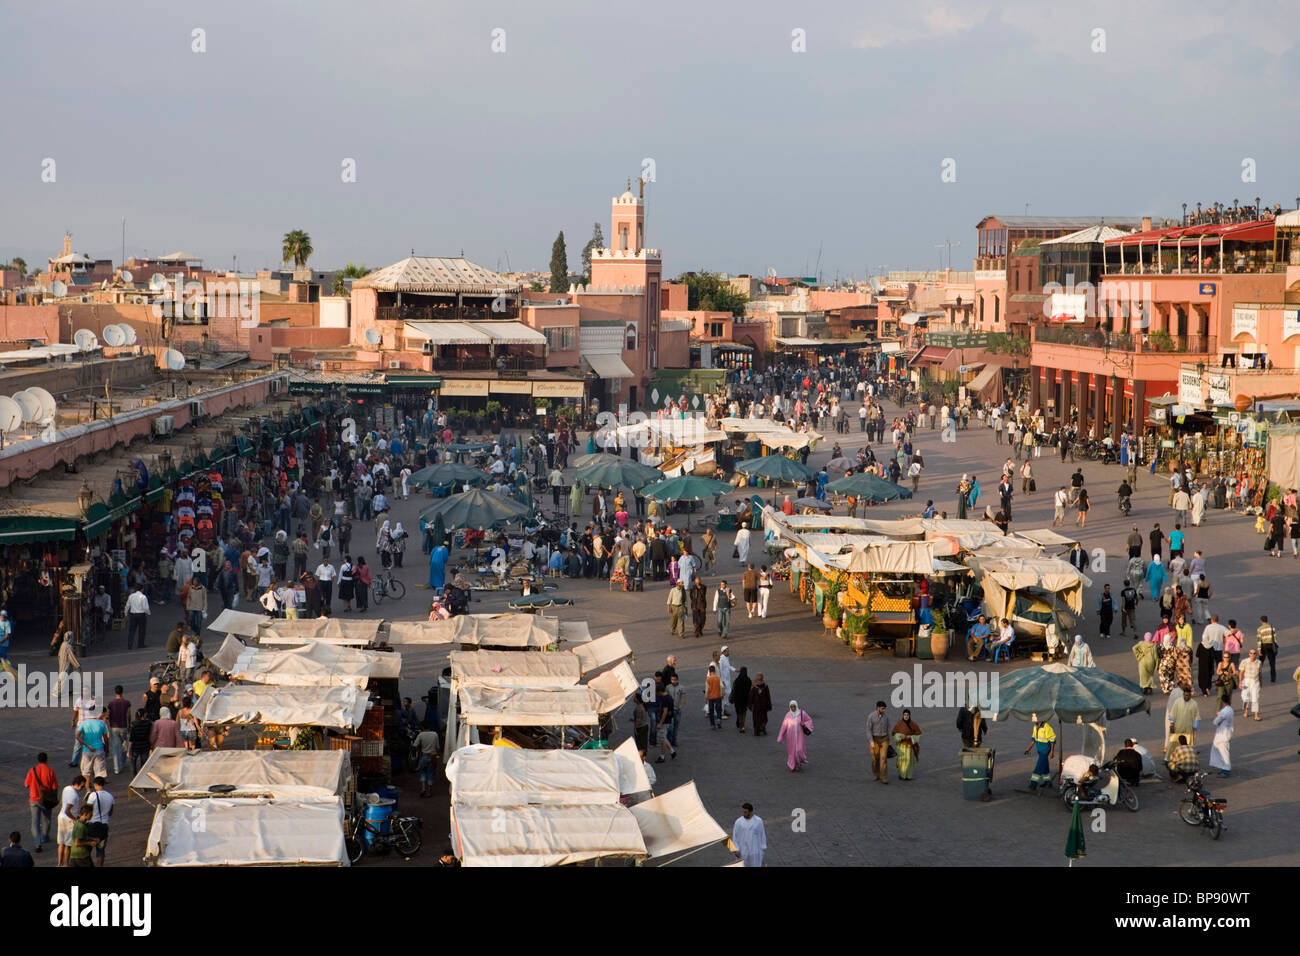 Djemaa el Fna Square and Souq Entrance, View from Terrace of Cafe Glacier, Marrakesh, Morocco, Africa Stock Photo